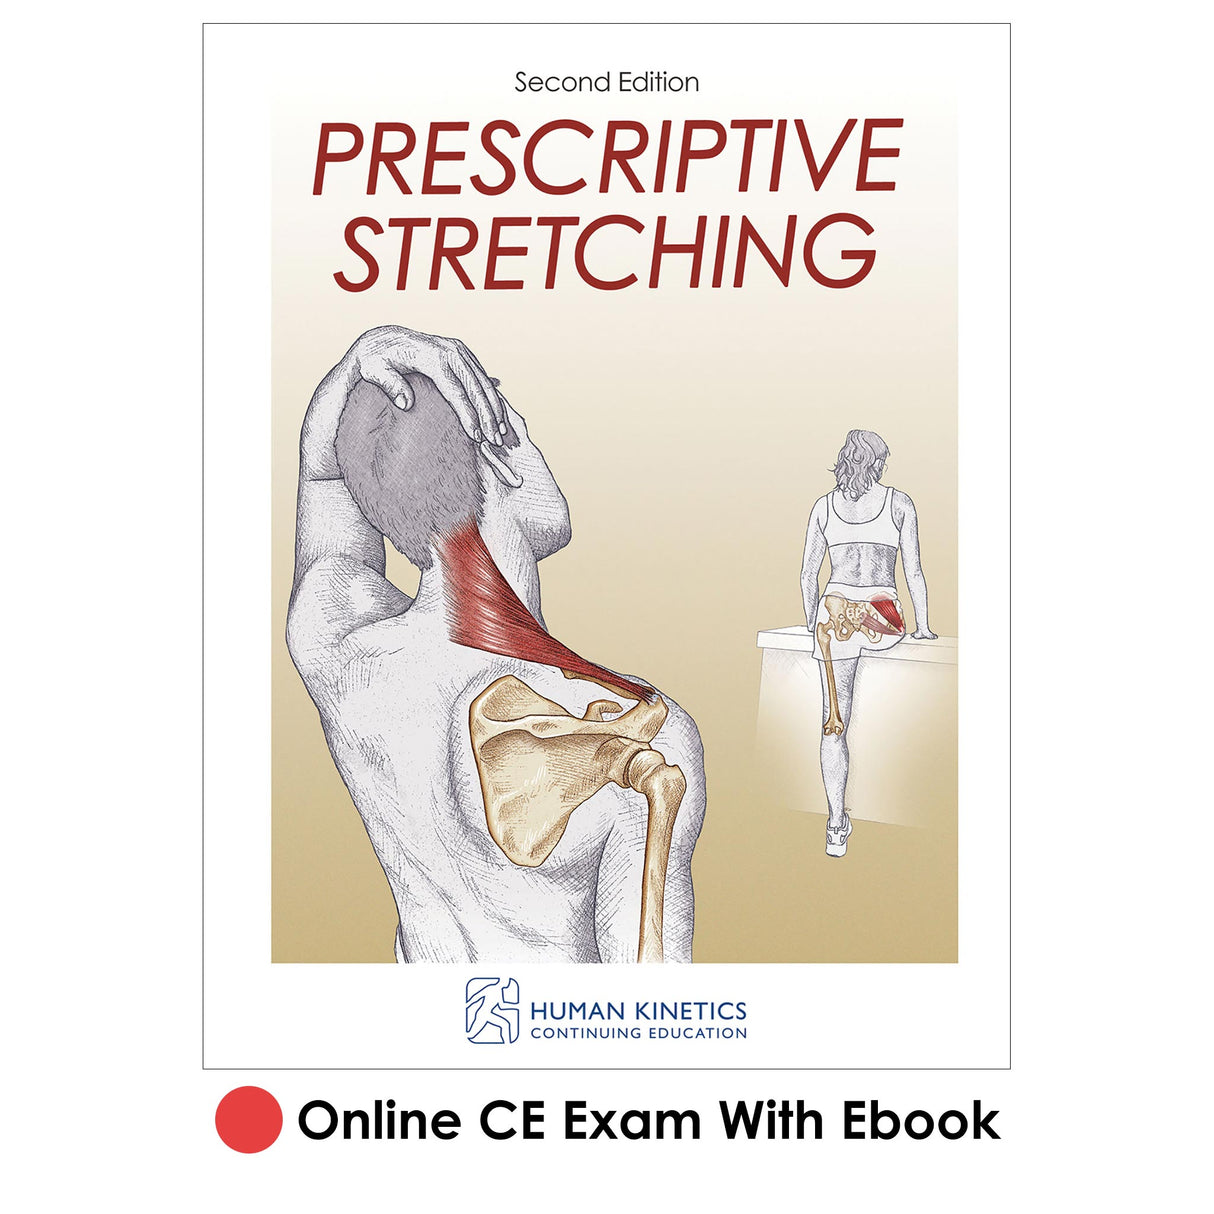 Prescriptive Stretching 2nd Edition Online CE Exam With Ebook